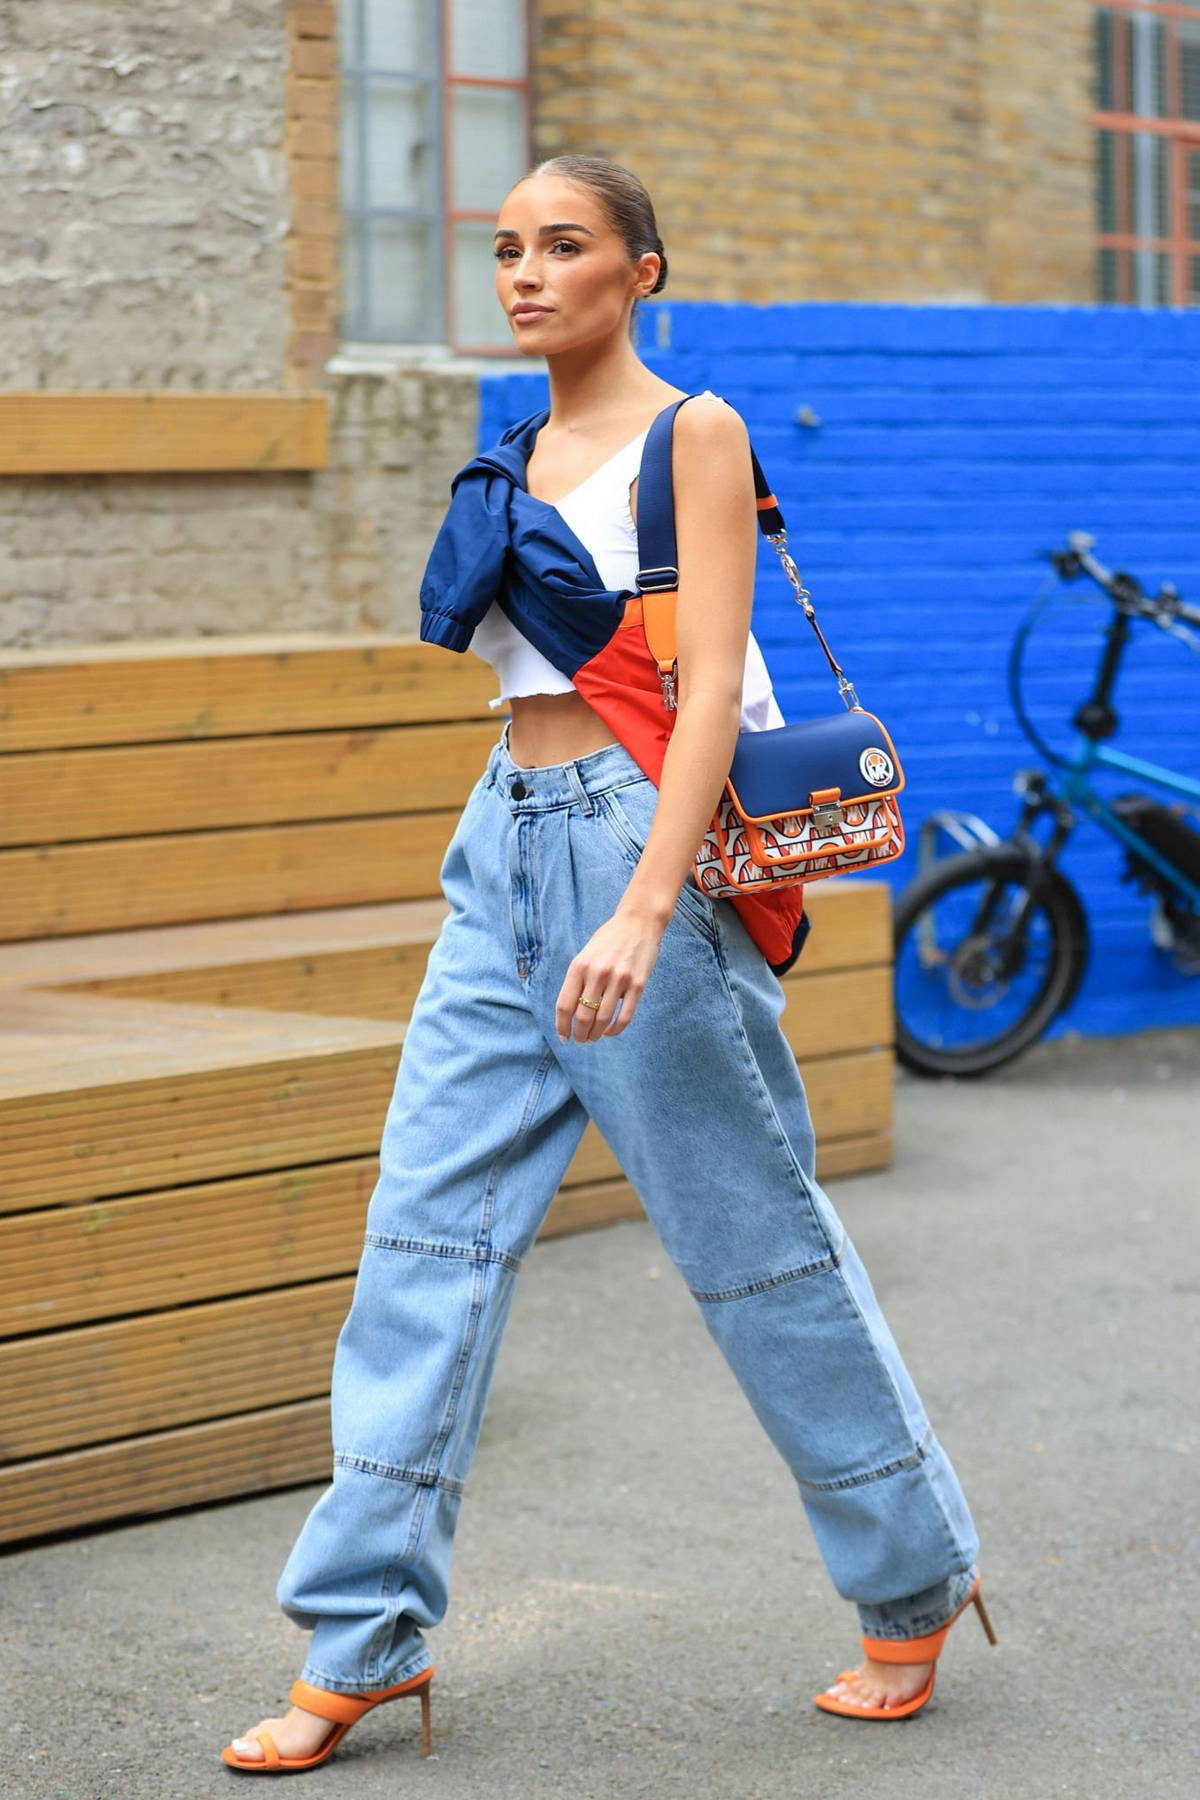 Olivia trendy in a crop top and baggy jeans while out in London,